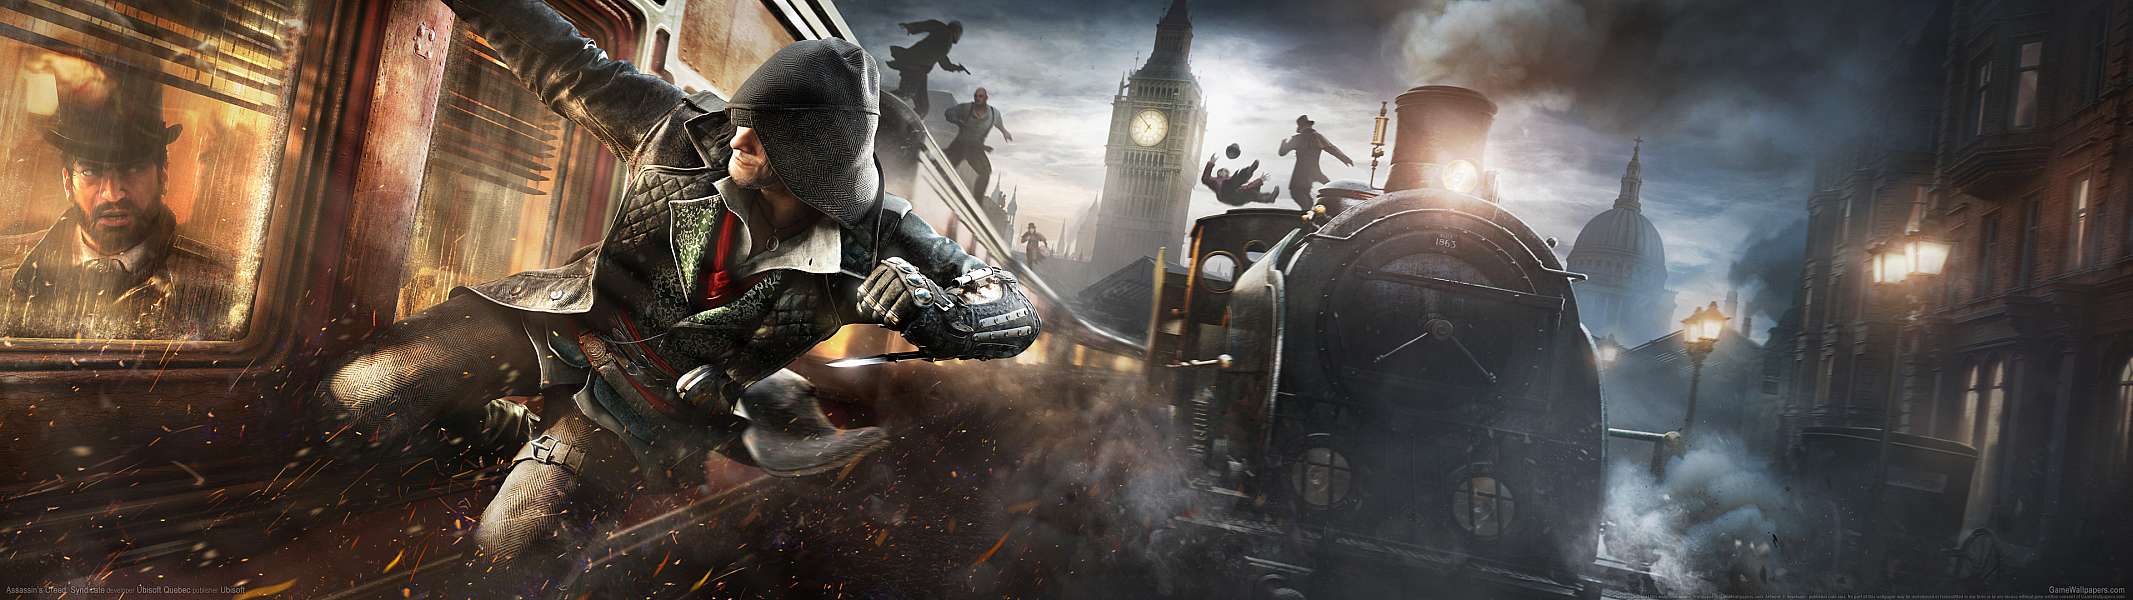 Assassin's Creed: Syndicate dual screen wallpaper or background